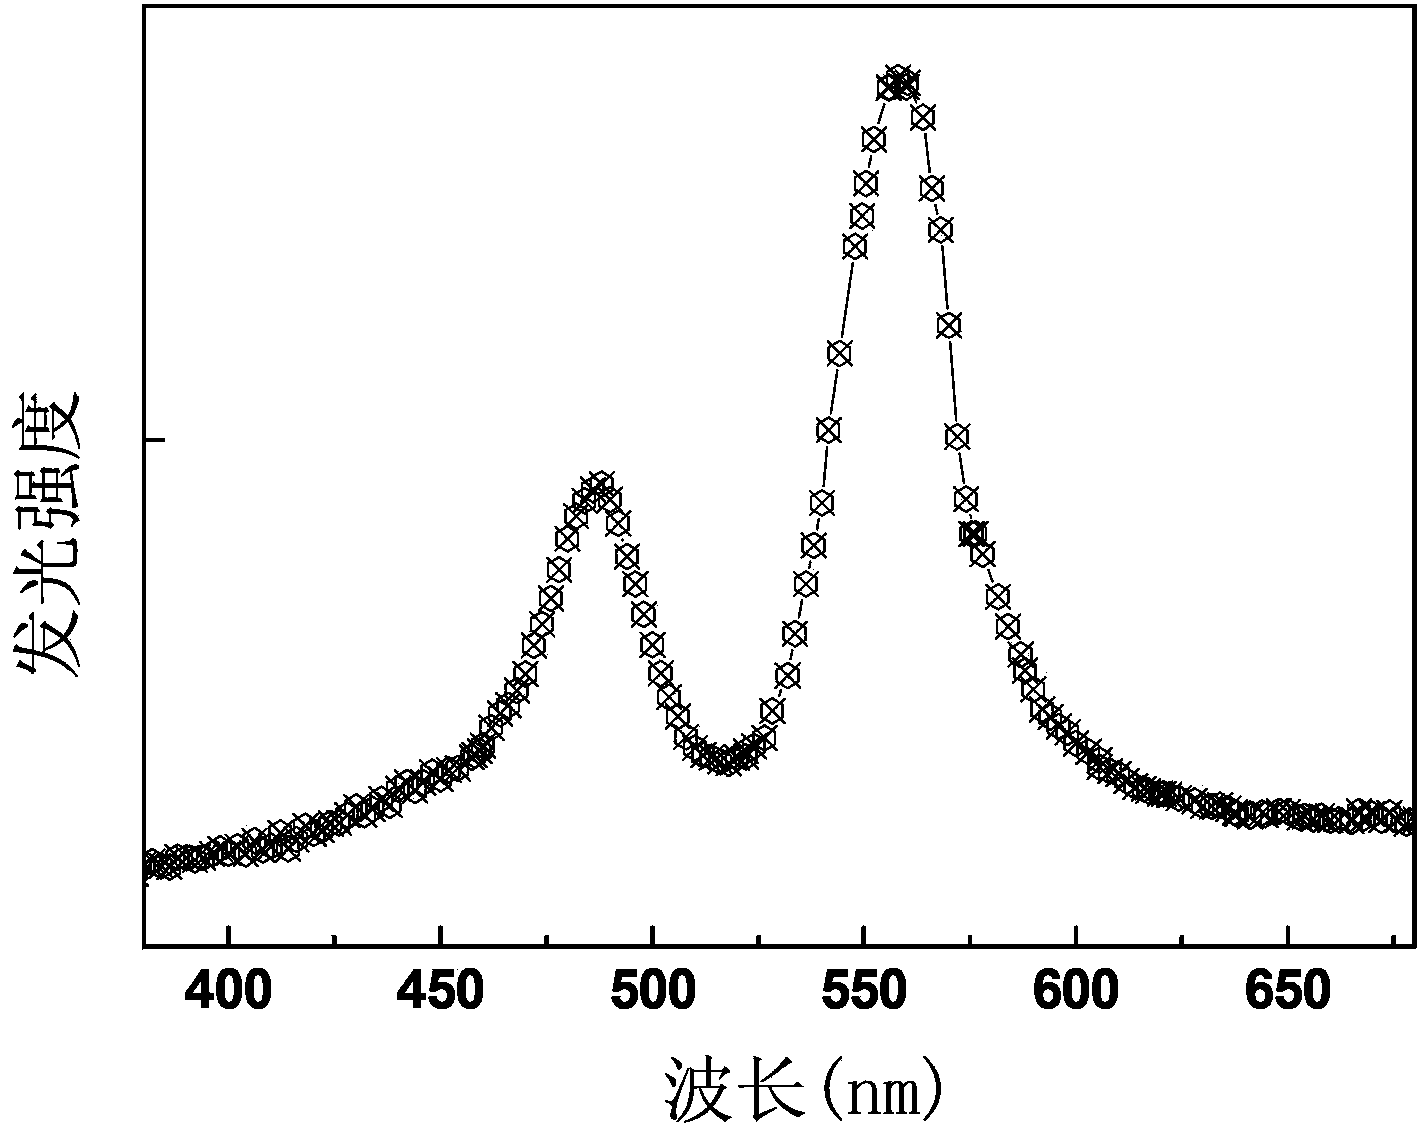 Cerium and terbium codoped borophosphate light-emitting film as well as preparation method and application of cerium and terbium codoped borophosphate light-emitting film